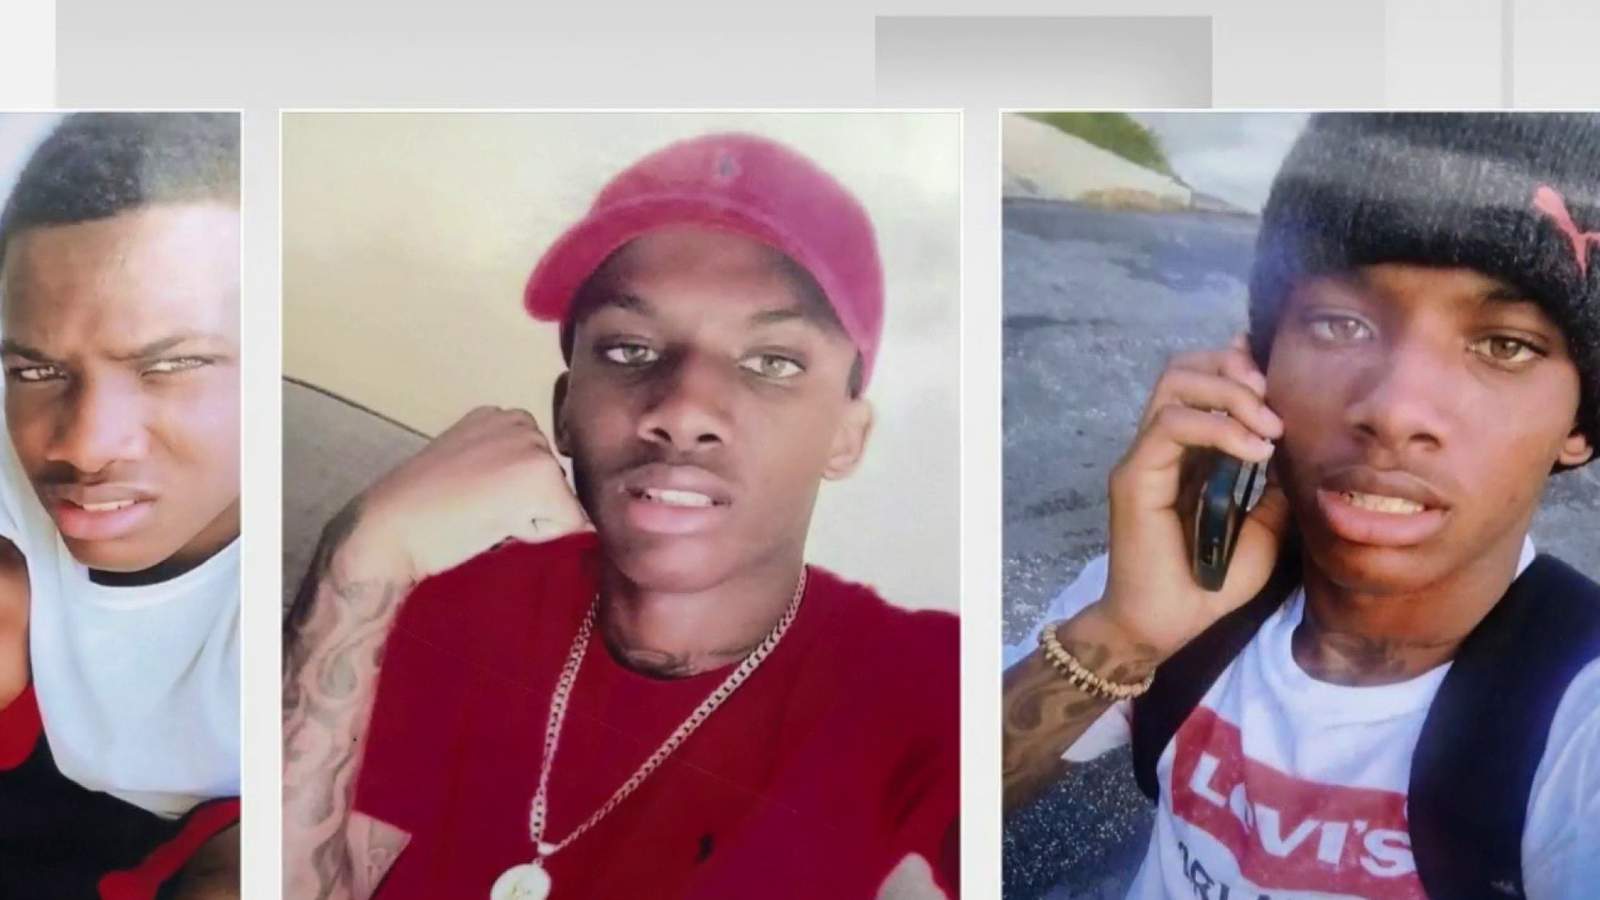 FDLE turns over investigation of Salaythis Melvin shooting to prosecutors